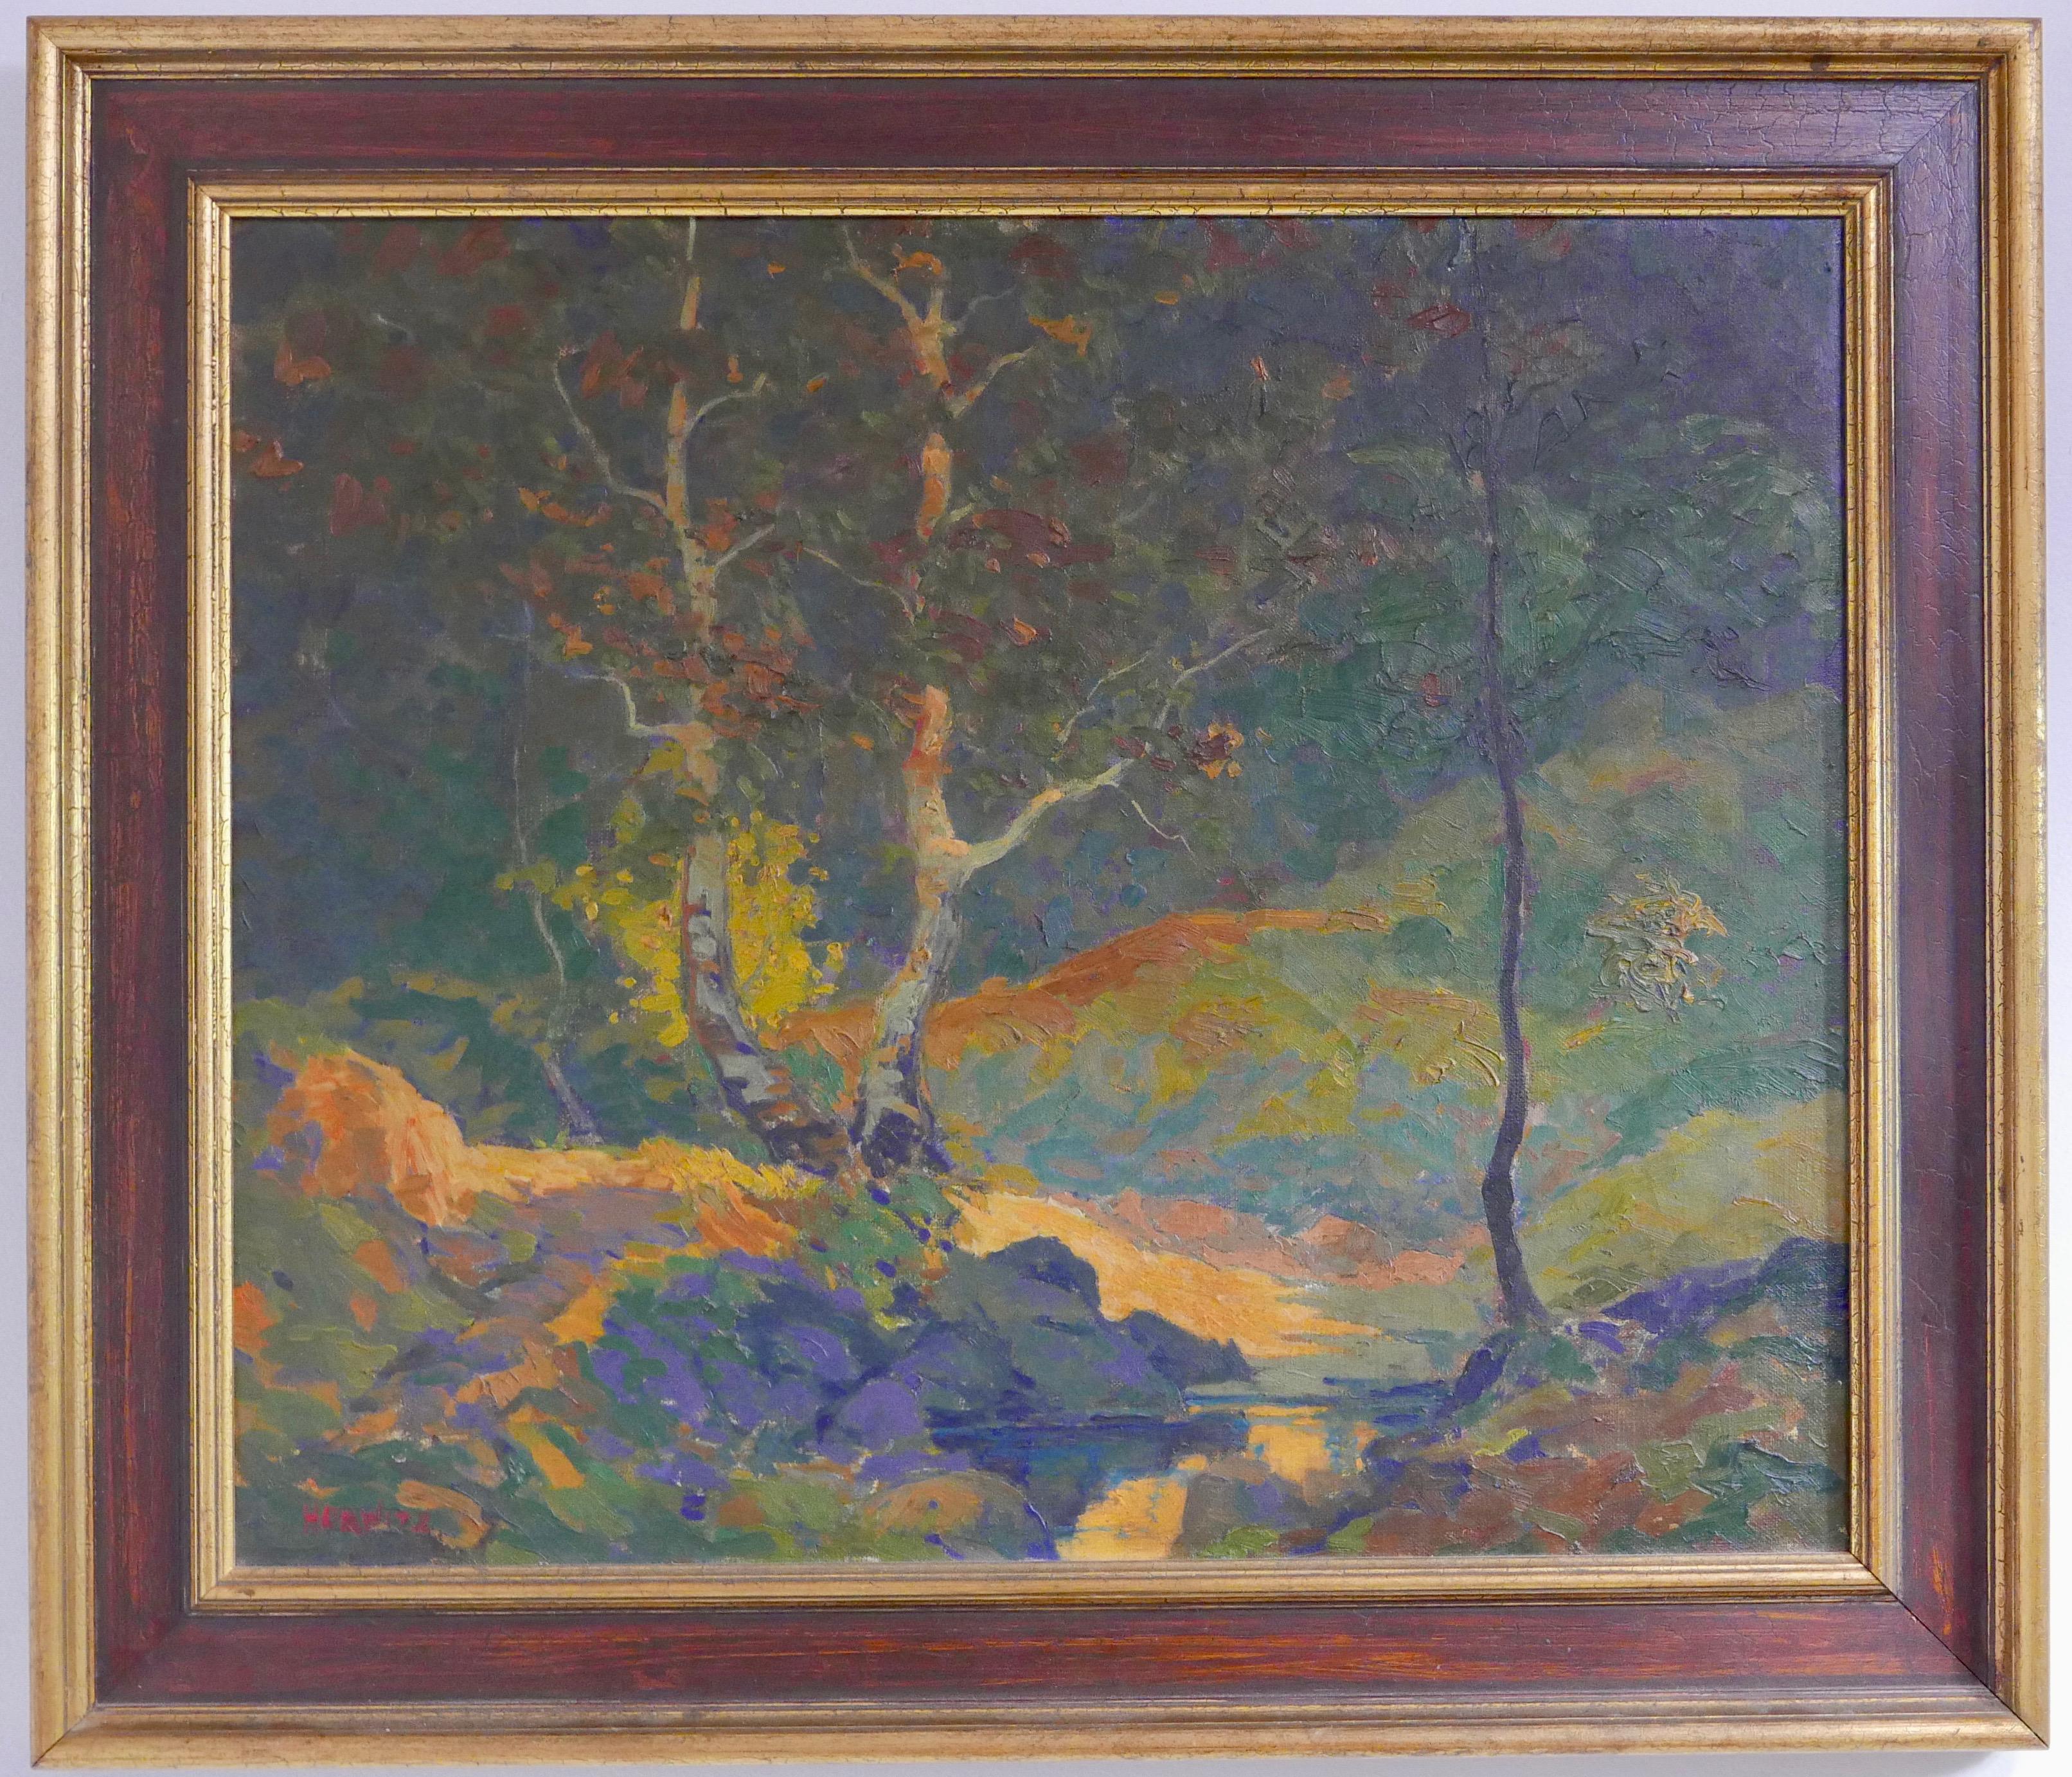 Abstract/ Impressionist Landscape by Russian/American William N. Horwitz, c 1924 6